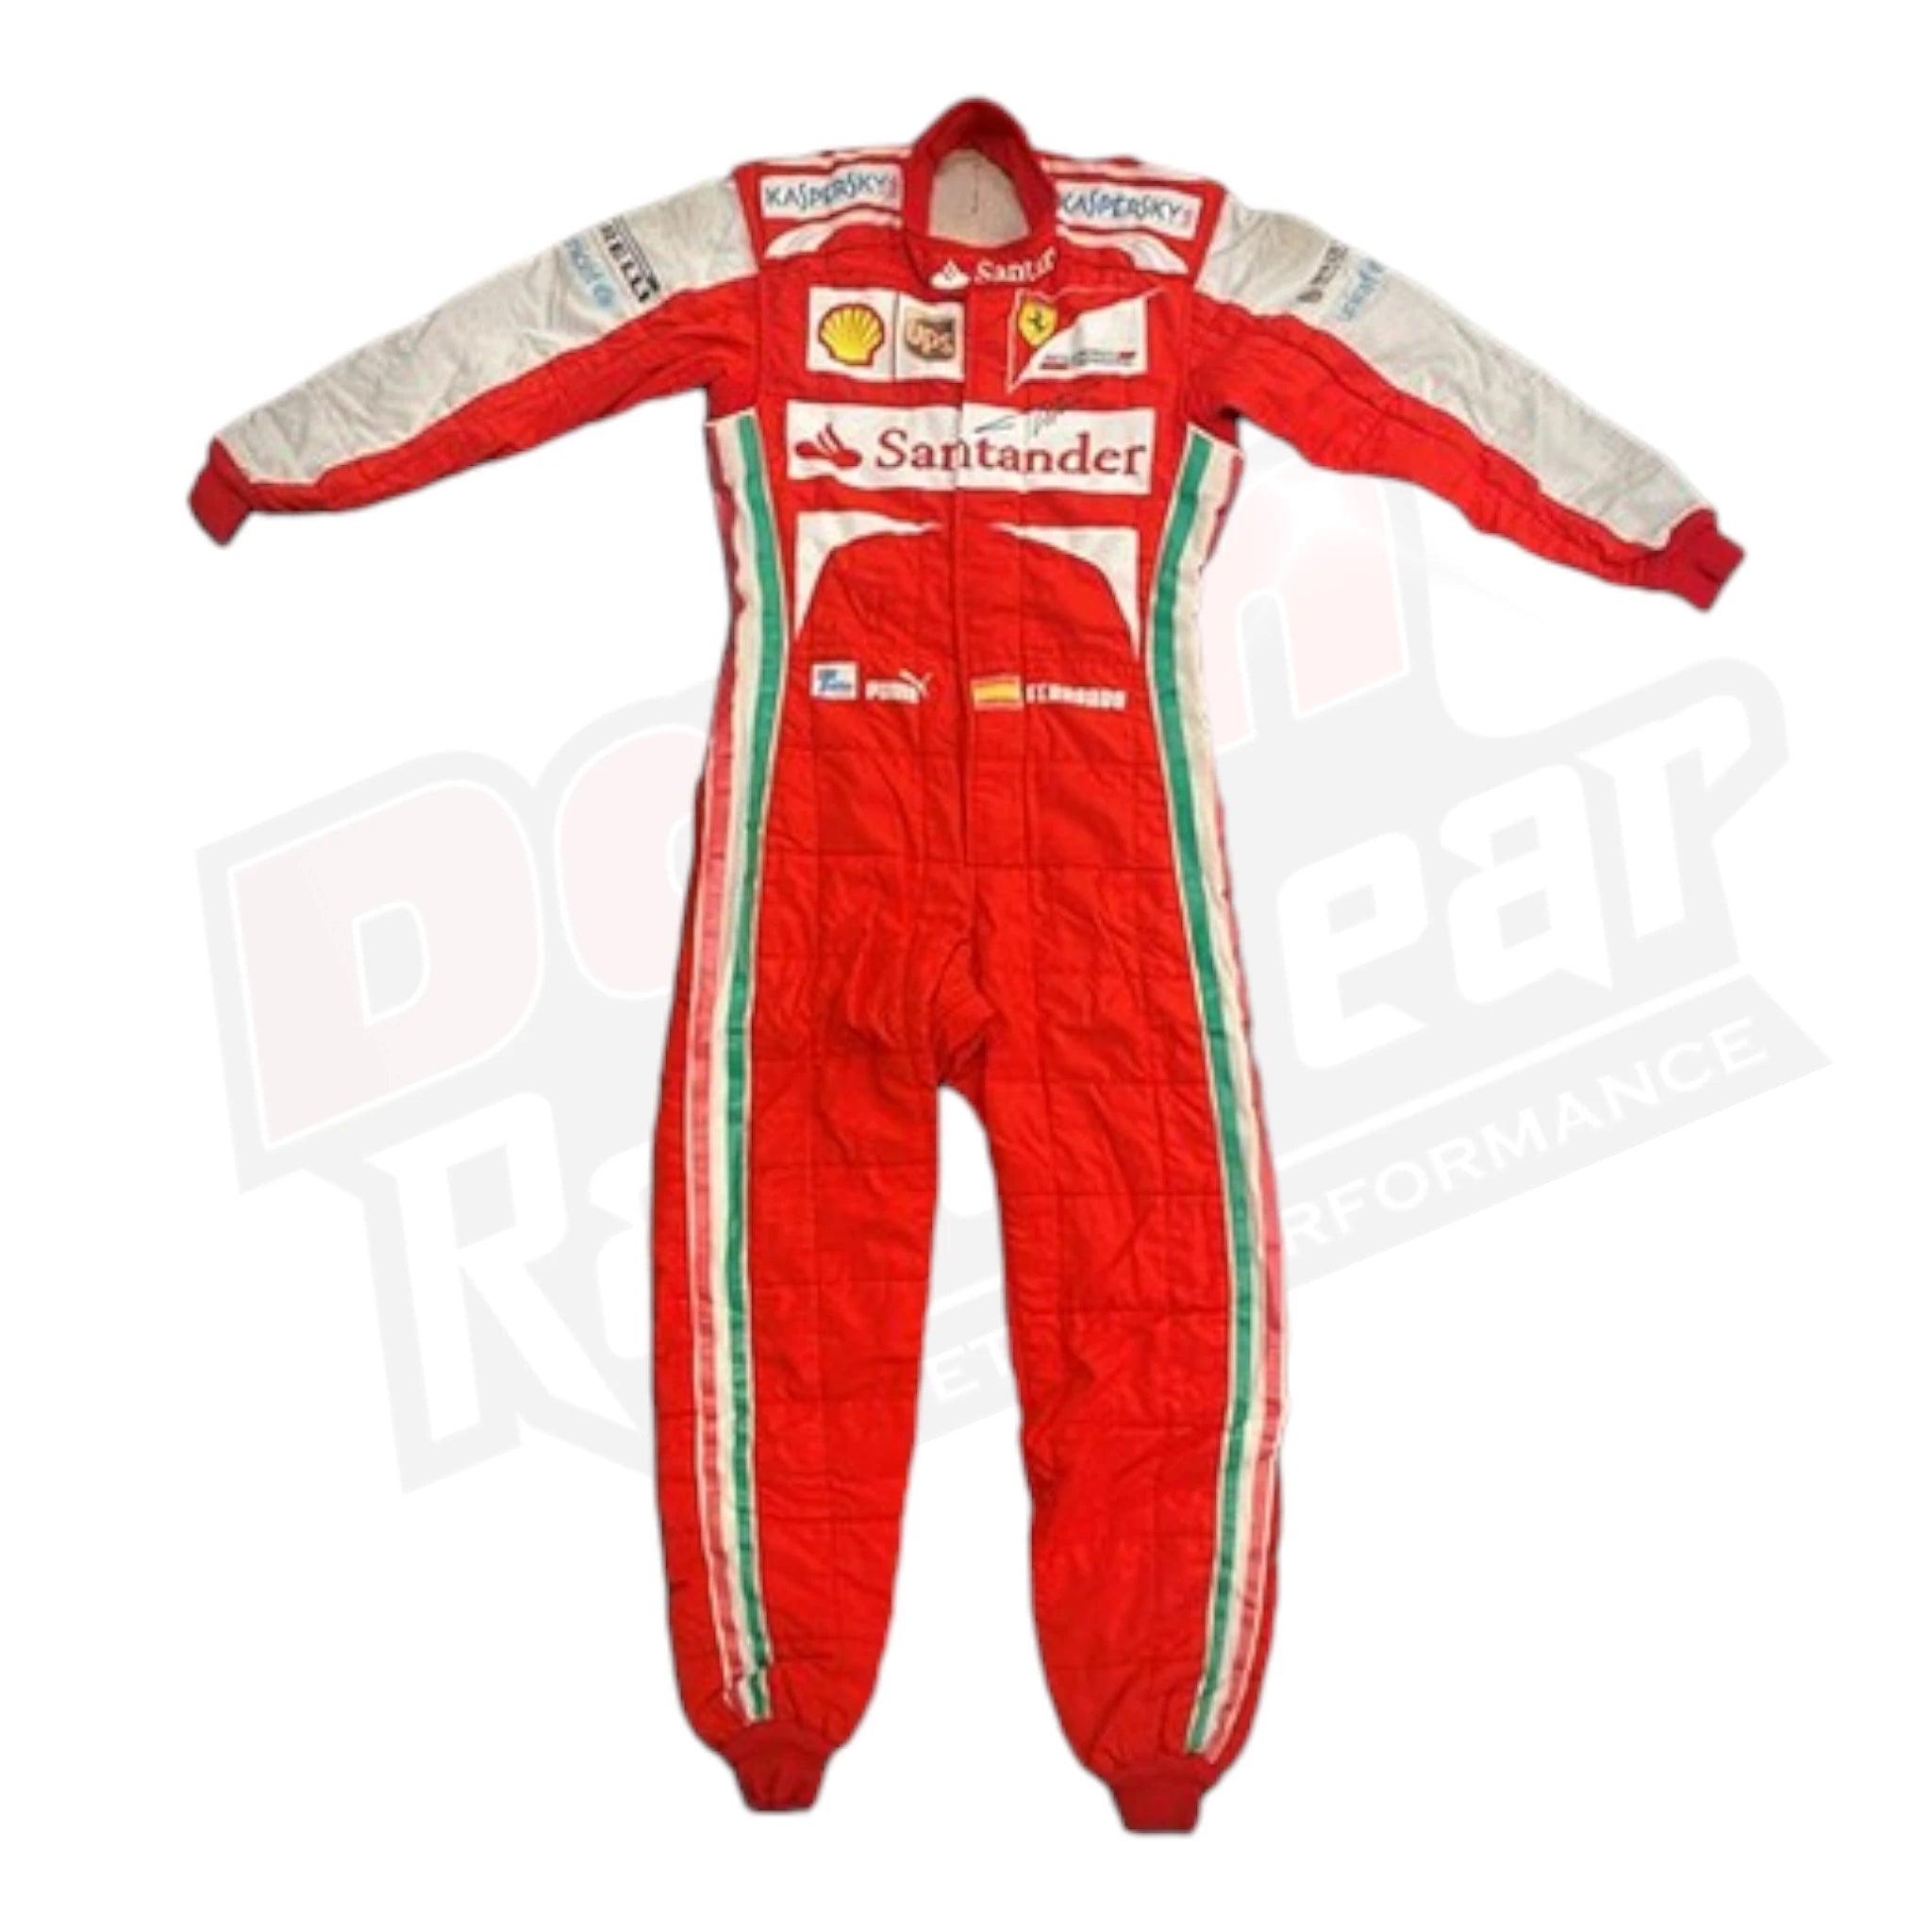 2013 Fernando Alonso Signed Racing Suit